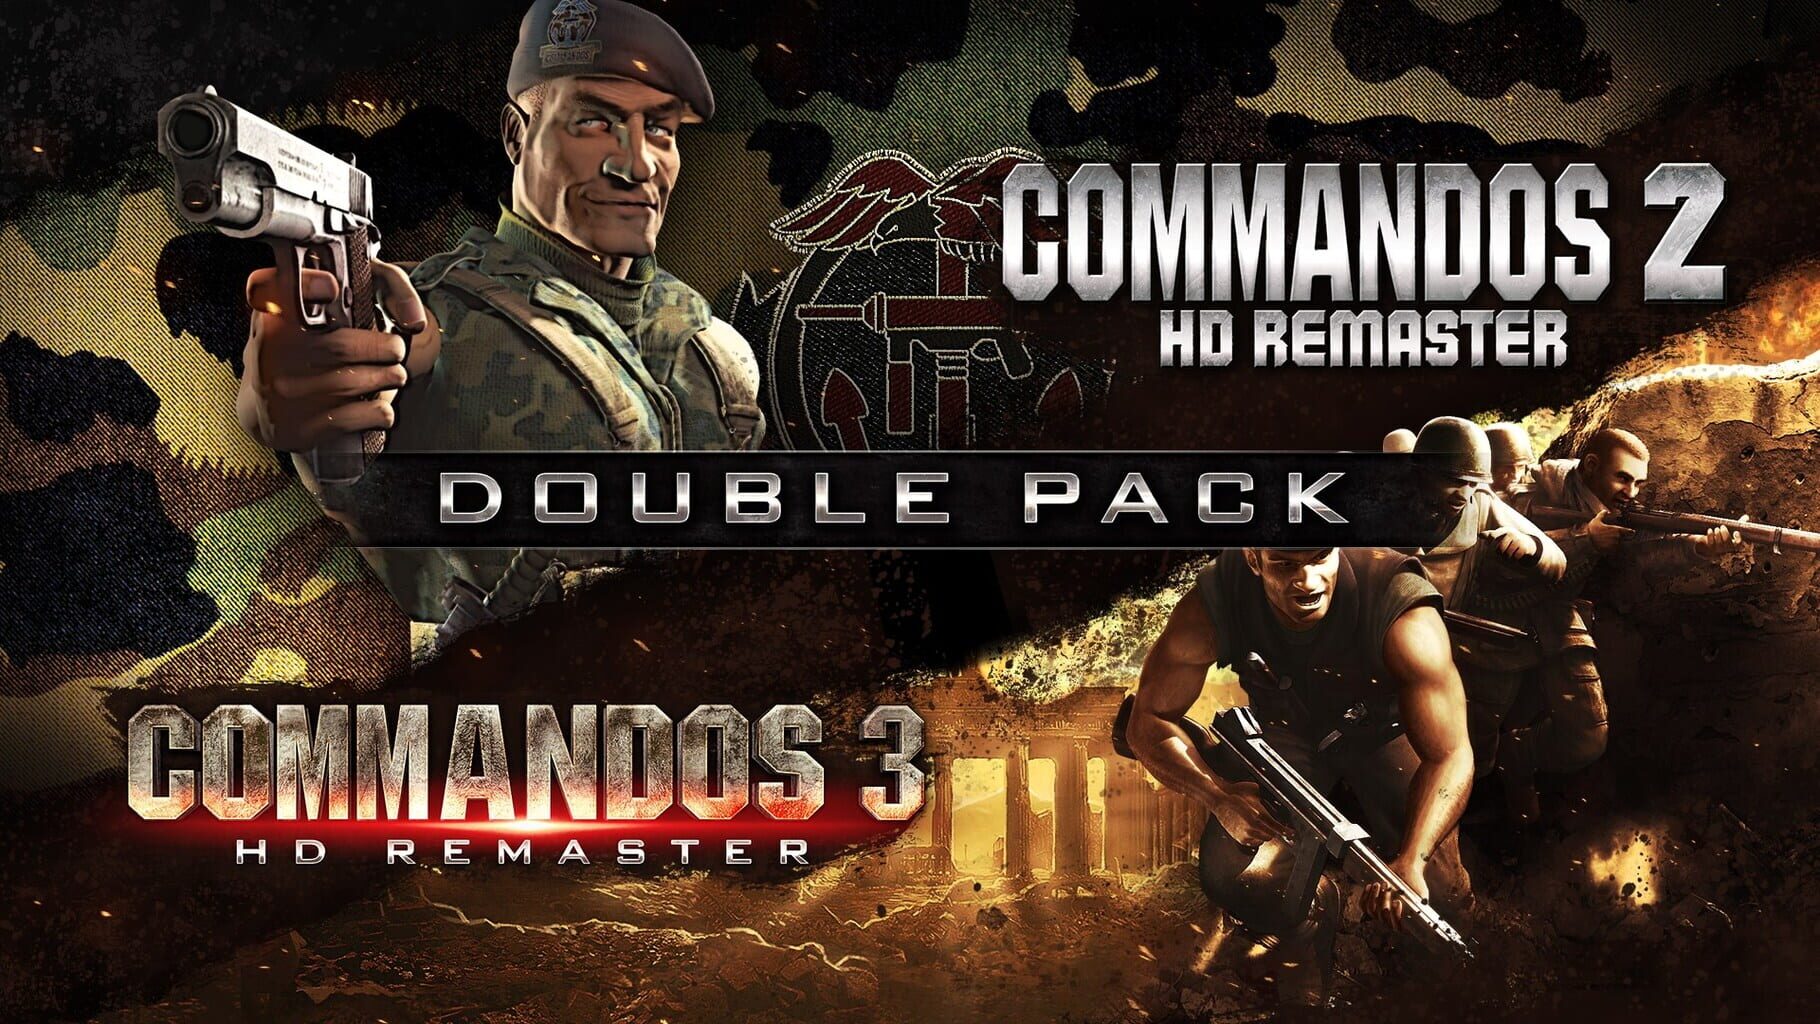 Commandos 2 & 3: HD Remaster Double Pack artwork